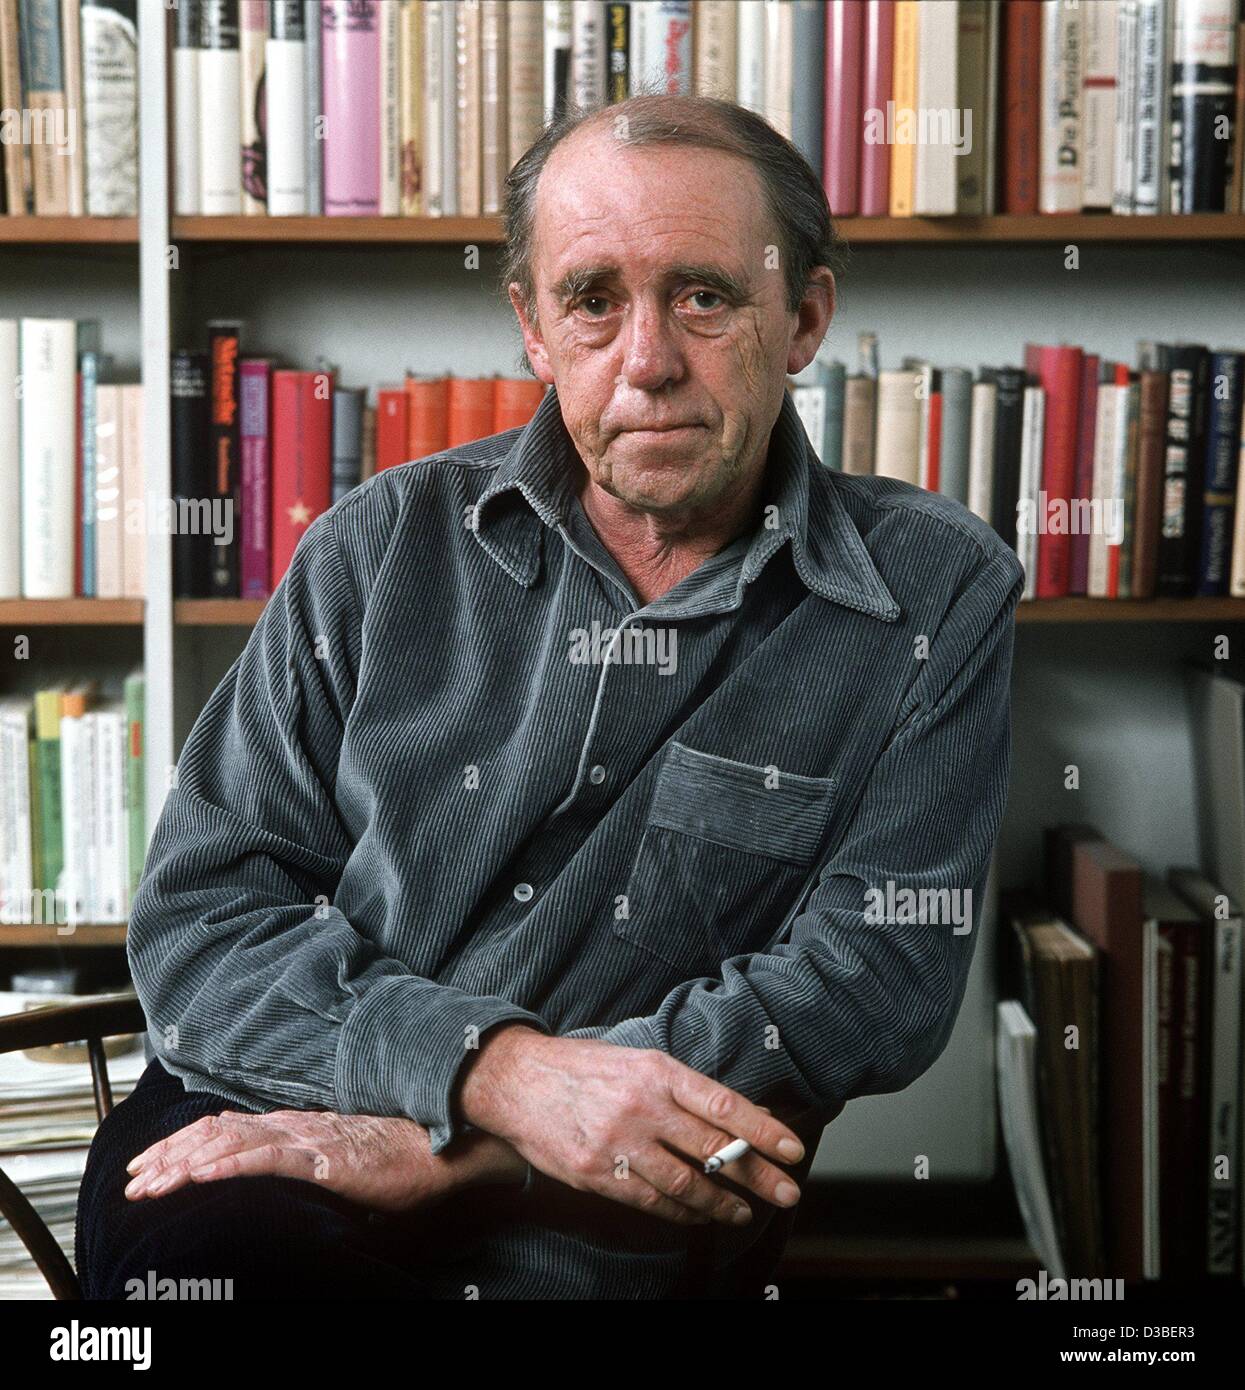 (dpa files) - German author Heinrich Boell in his apartment in Cologne, West Germany, December 1977. Boell was born 21 December 1917 in Cologne and died in Kreuzau, West Germany, 16 July 1985. In 1962 he received the Buechner Award and in 1972 the Noble Prize for Literature. Some of his famous works Stock Photo